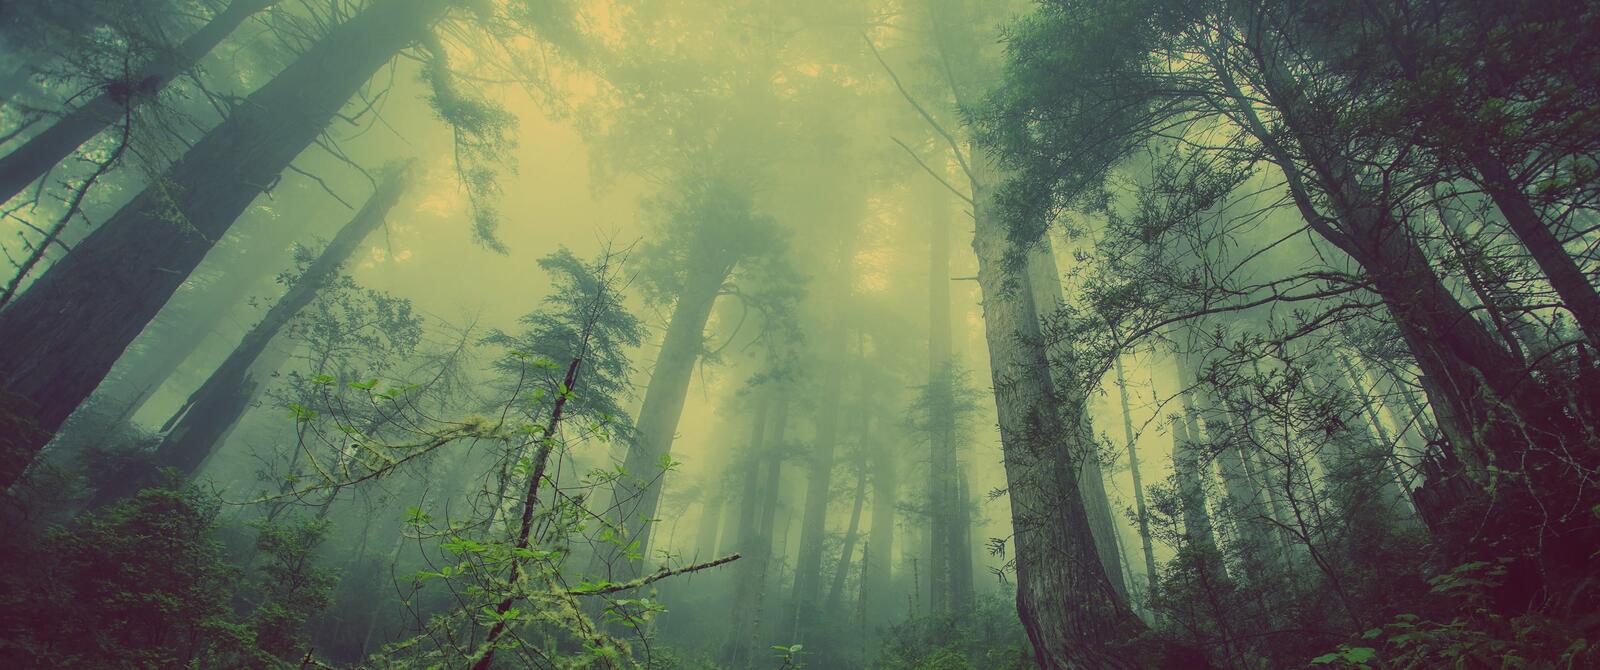 Free photo Gloomy misty forest with conifers